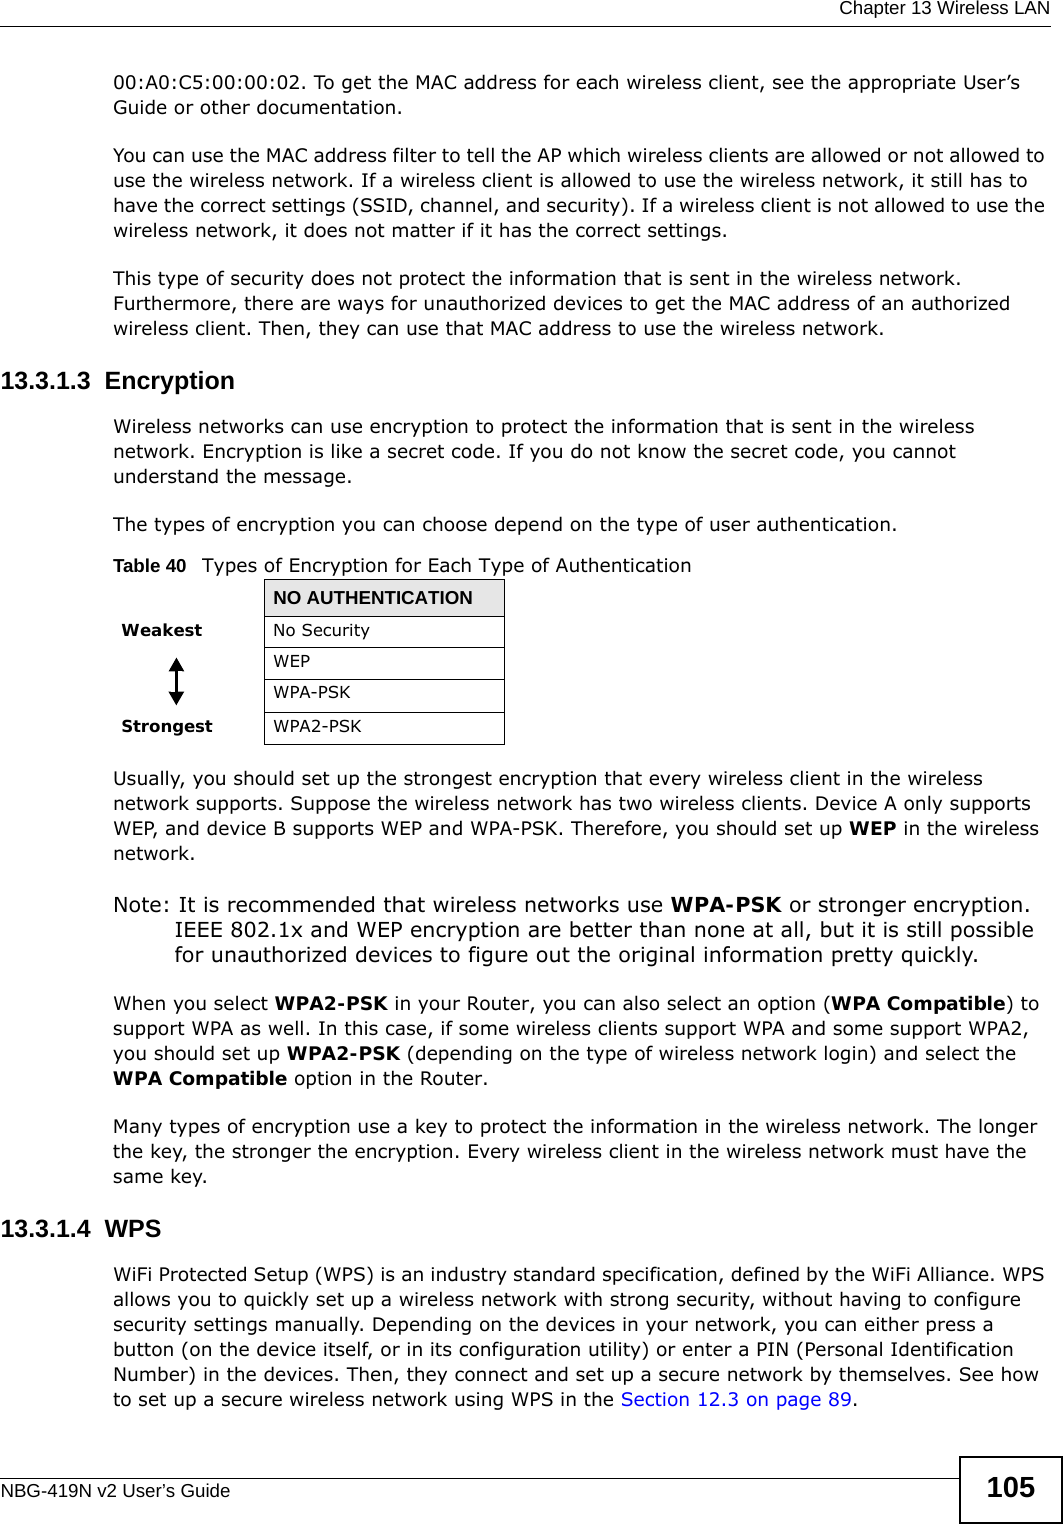  Chapter 13 Wireless LANNBG-419N v2 User’s Guide 10500:A0:C5:00:00:02. To get the MAC address for each wireless client, see the appropriate User’s Guide or other documentation.You can use the MAC address filter to tell the AP which wireless clients are allowed or not allowed to use the wireless network. If a wireless client is allowed to use the wireless network, it still has to have the correct settings (SSID, channel, and security). If a wireless client is not allowed to use the wireless network, it does not matter if it has the correct settings.This type of security does not protect the information that is sent in the wireless network. Furthermore, there are ways for unauthorized devices to get the MAC address of an authorized wireless client. Then, they can use that MAC address to use the wireless network.13.3.1.3  EncryptionWireless networks can use encryption to protect the information that is sent in the wireless network. Encryption is like a secret code. If you do not know the secret code, you cannot understand the message.The types of encryption you can choose depend on the type of user authentication. Usually, you should set up the strongest encryption that every wireless client in the wireless network supports. Suppose the wireless network has two wireless clients. Device A only supports WEP, and device B supports WEP and WPA-PSK. Therefore, you should set up WEP in the wireless network.Note: It is recommended that wireless networks use WPA-PSK or stronger encryption. IEEE 802.1x and WEP encryption are better than none at all, but it is still possible for unauthorized devices to figure out the original information pretty quickly.When you select WPA2-PSK in your Router, you can also select an option (WPA Compatible) to support WPA as well. In this case, if some wireless clients support WPA and some support WPA2, you should set up WPA2-PSK (depending on the type of wireless network login) and select the WPA Compatible option in the Router.Many types of encryption use a key to protect the information in the wireless network. The longer the key, the stronger the encryption. Every wireless client in the wireless network must have the same key.13.3.1.4  WPSWiFi Protected Setup (WPS) is an industry standard specification, defined by the WiFi Alliance. WPS allows you to quickly set up a wireless network with strong security, without having to configure security settings manually. Depending on the devices in your network, you can either press a button (on the device itself, or in its configuration utility) or enter a PIN (Personal Identification Number) in the devices. Then, they connect and set up a secure network by themselves. See how to set up a secure wireless network using WPS in the Section 12.3 on page 89. Table 40   Types of Encryption for Each Type of AuthenticationNO AUTHENTICATIONWeakest No SecurityWEPWPA-PSKStrongest WPA2-PSK